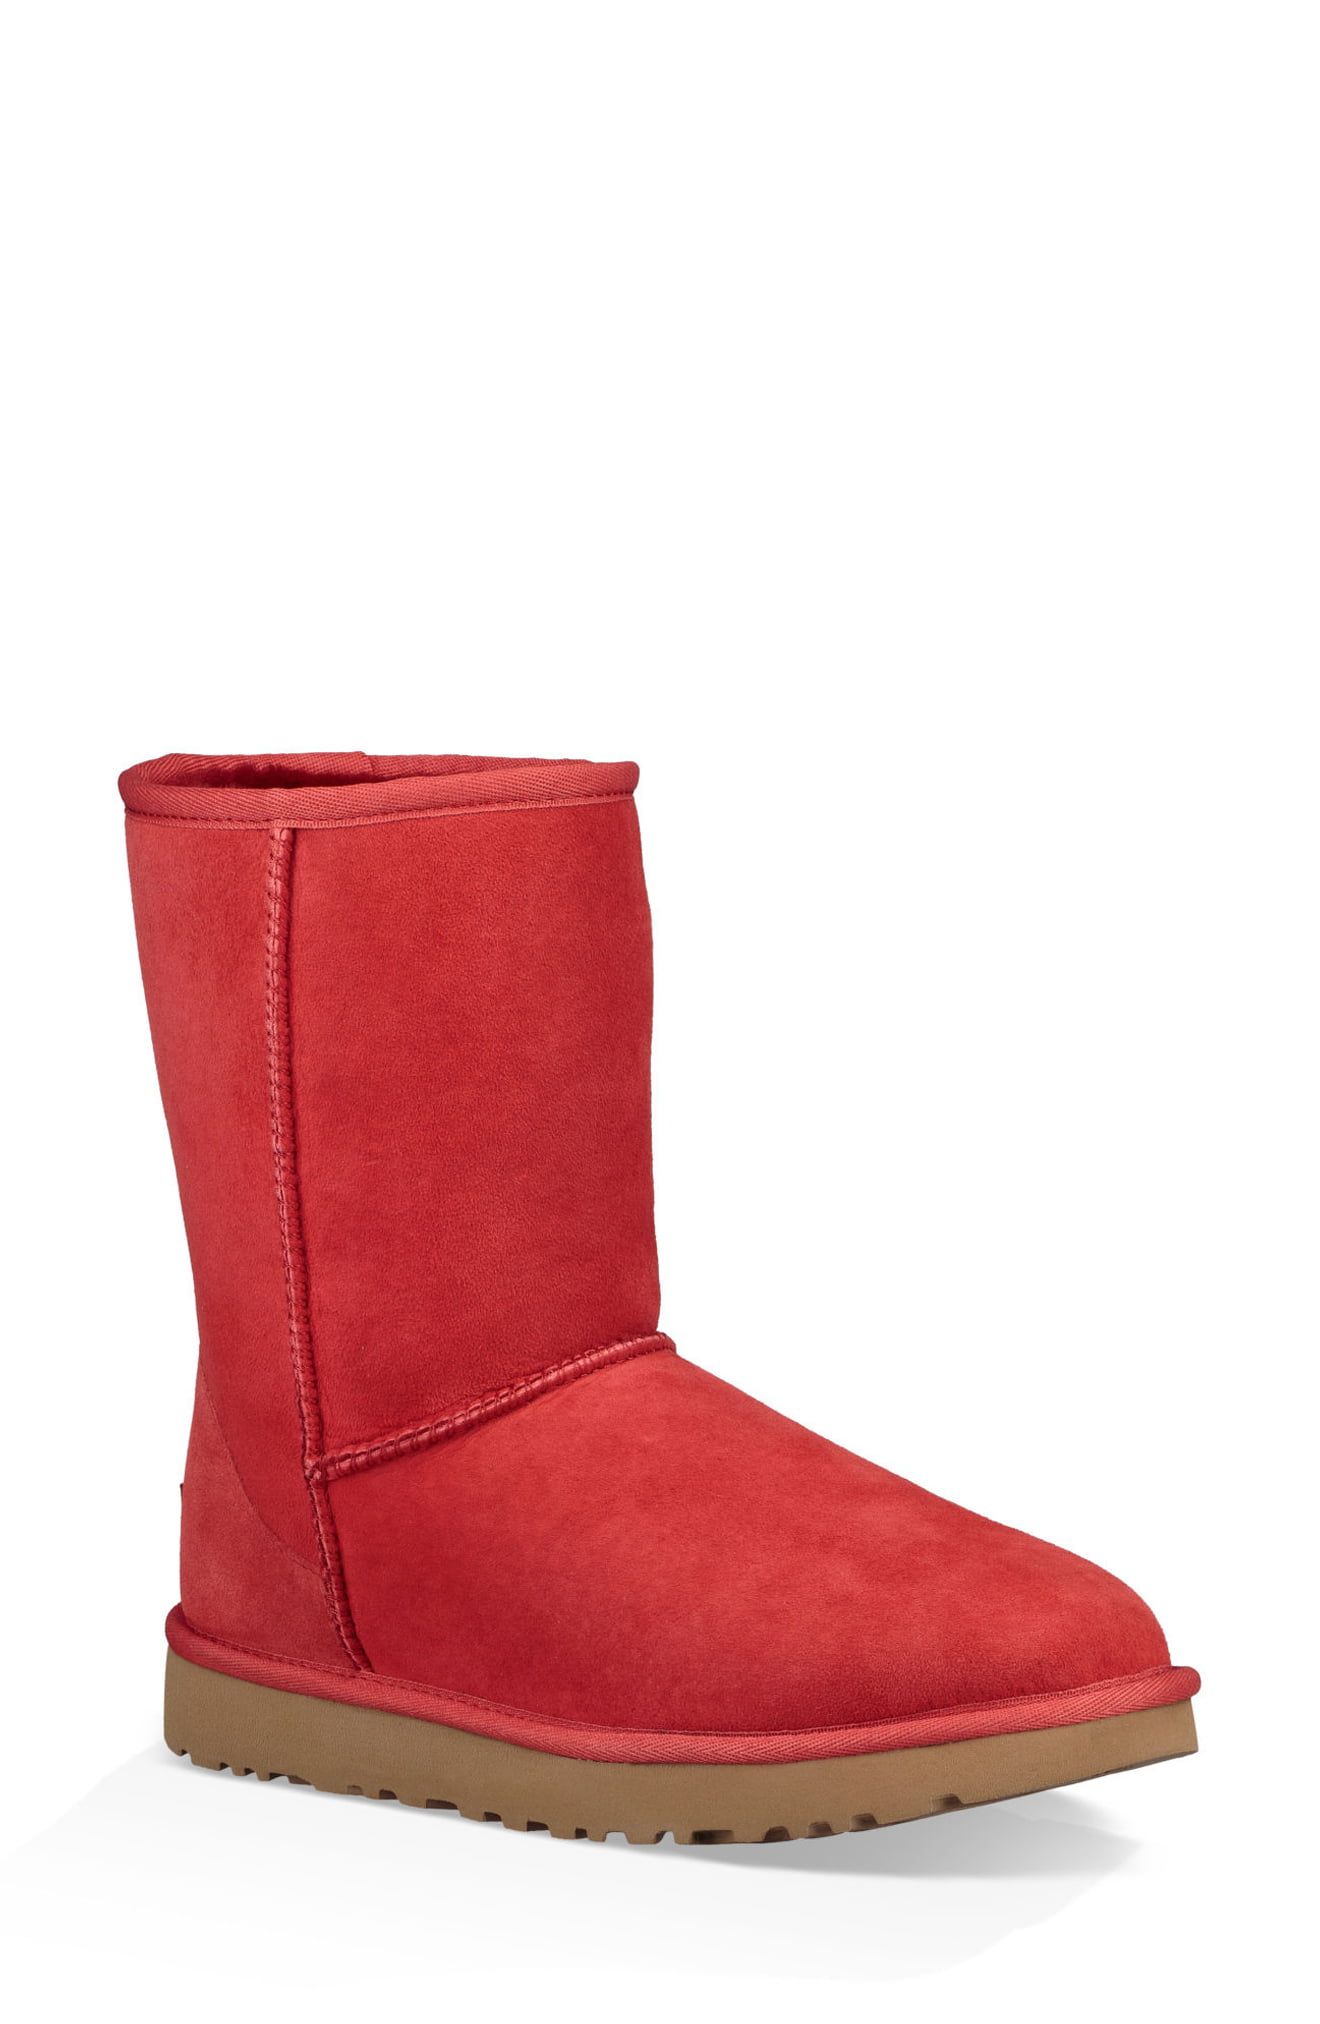 Erotic boutique knee high red boots